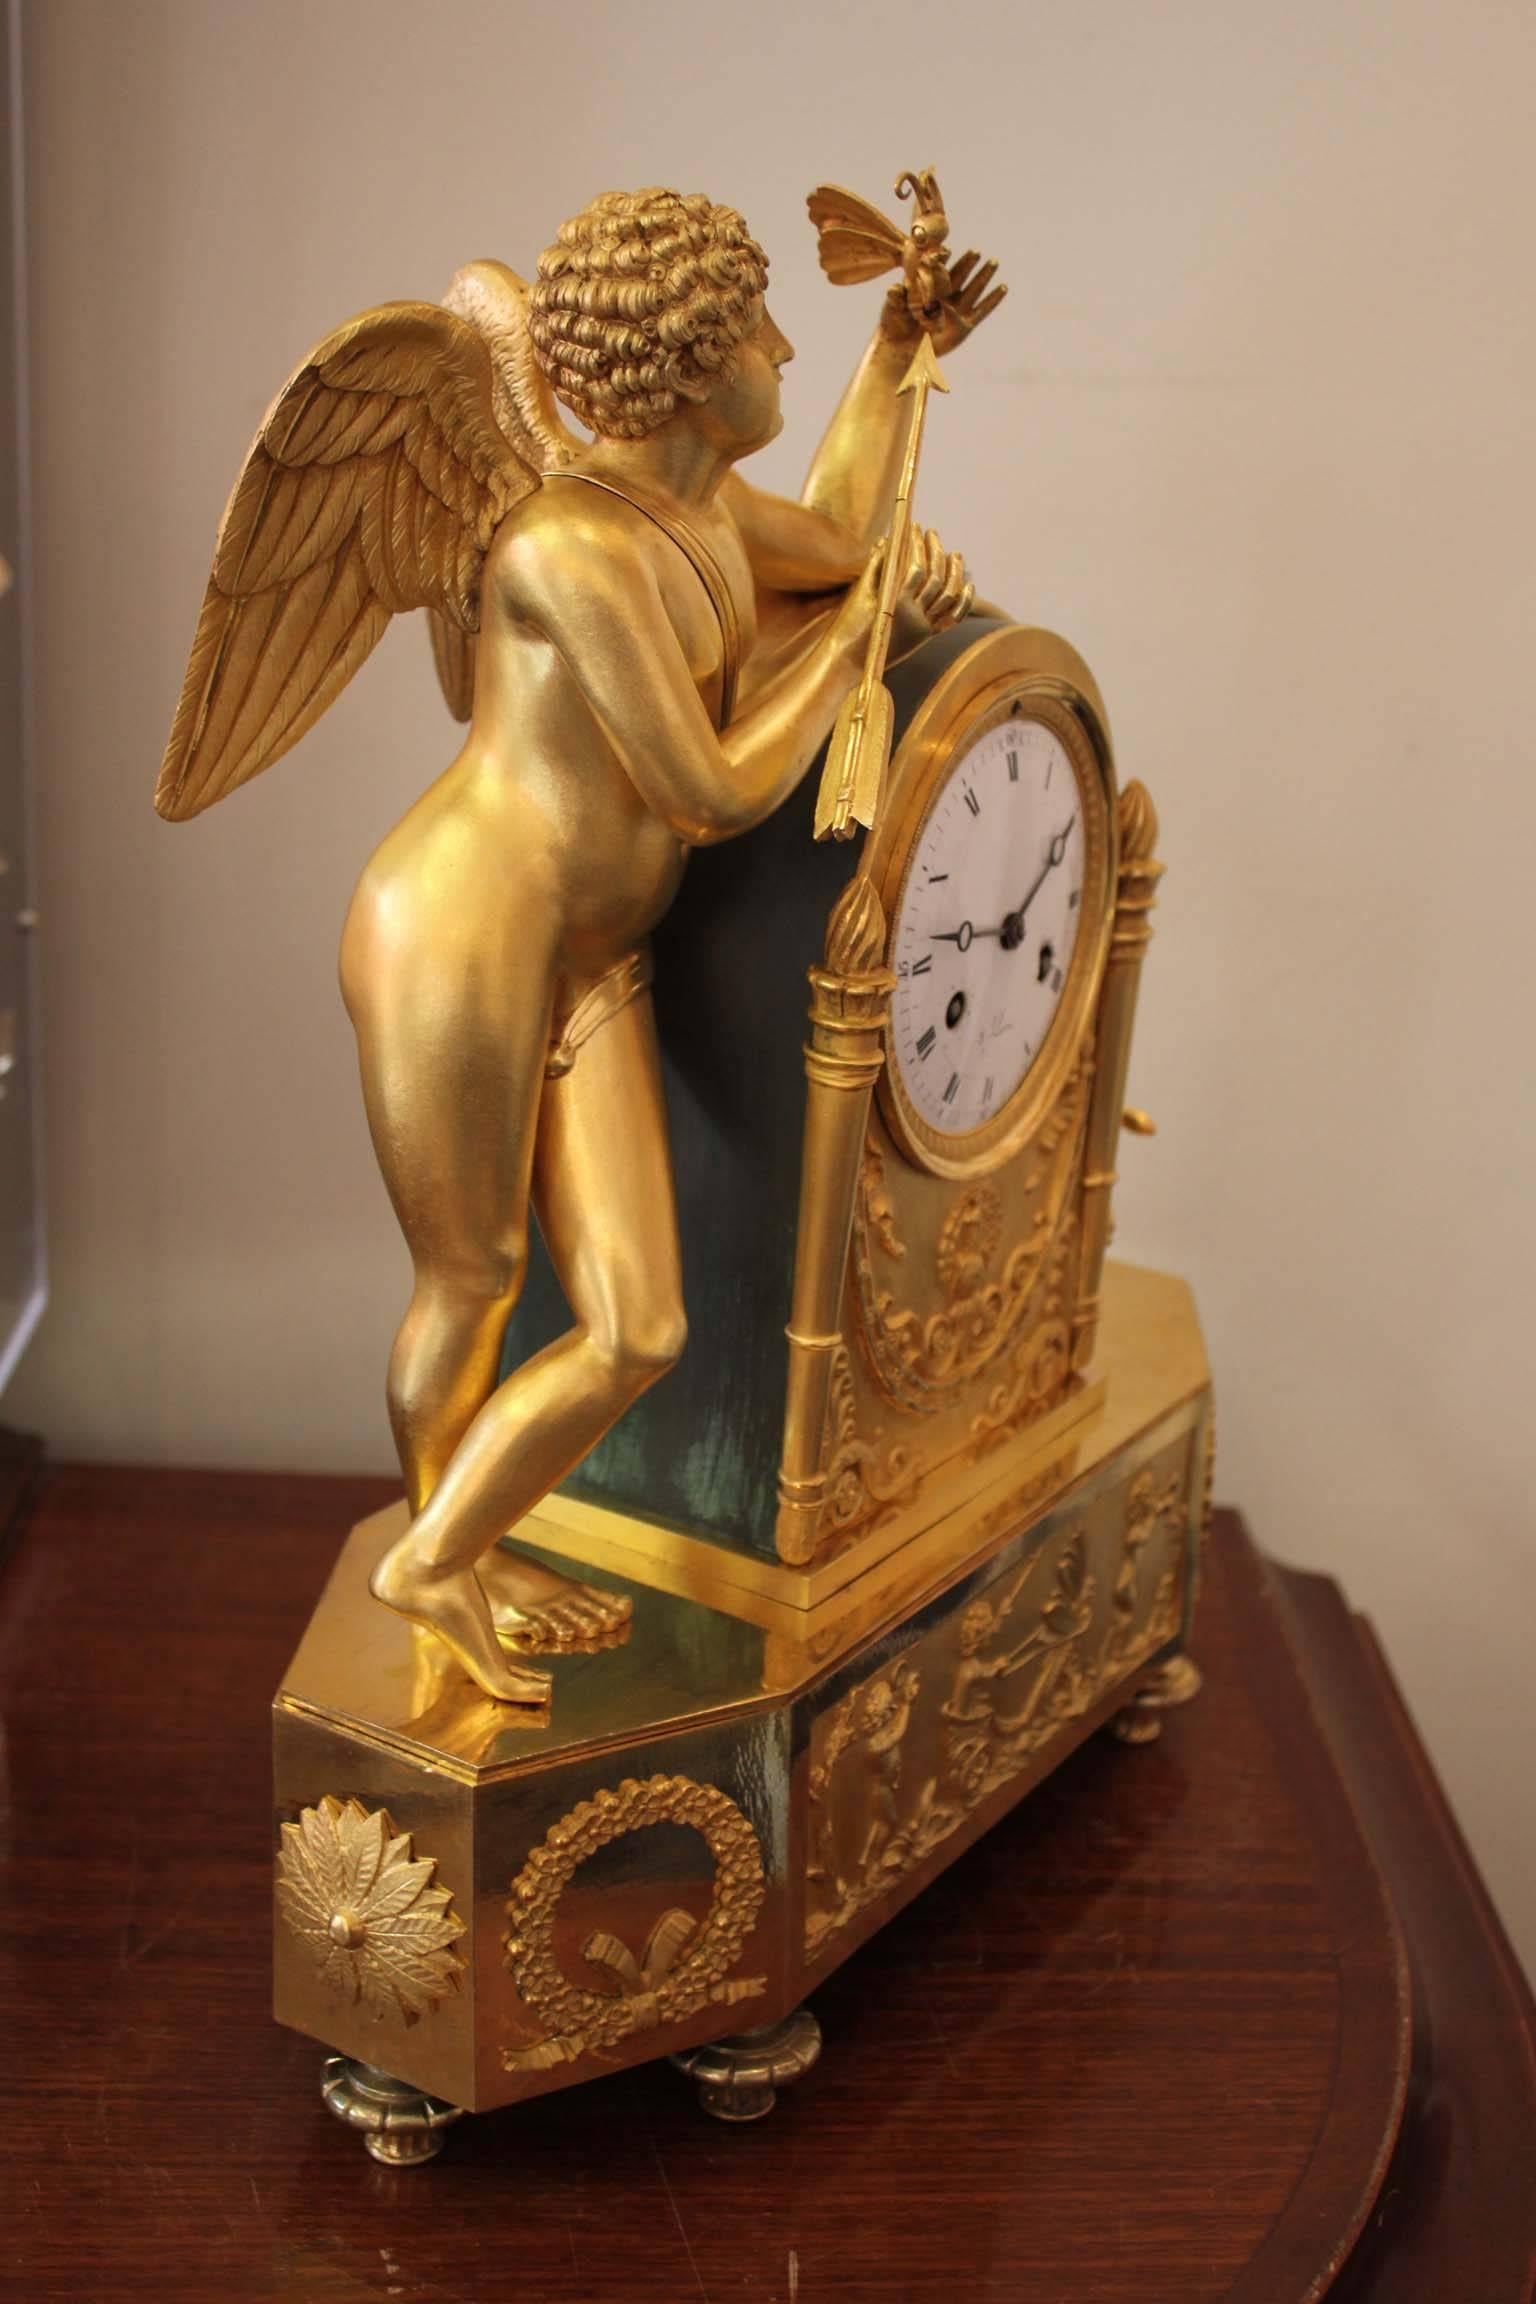 Beautiful clock representing an Allegory of Love. Made in gilt bronze and chiseled brass, partially matified, on a rectangular plinth base with musician puttis surrounded by flowers and ribbons. Cupidon holds a butterfly in his hand, and is about to